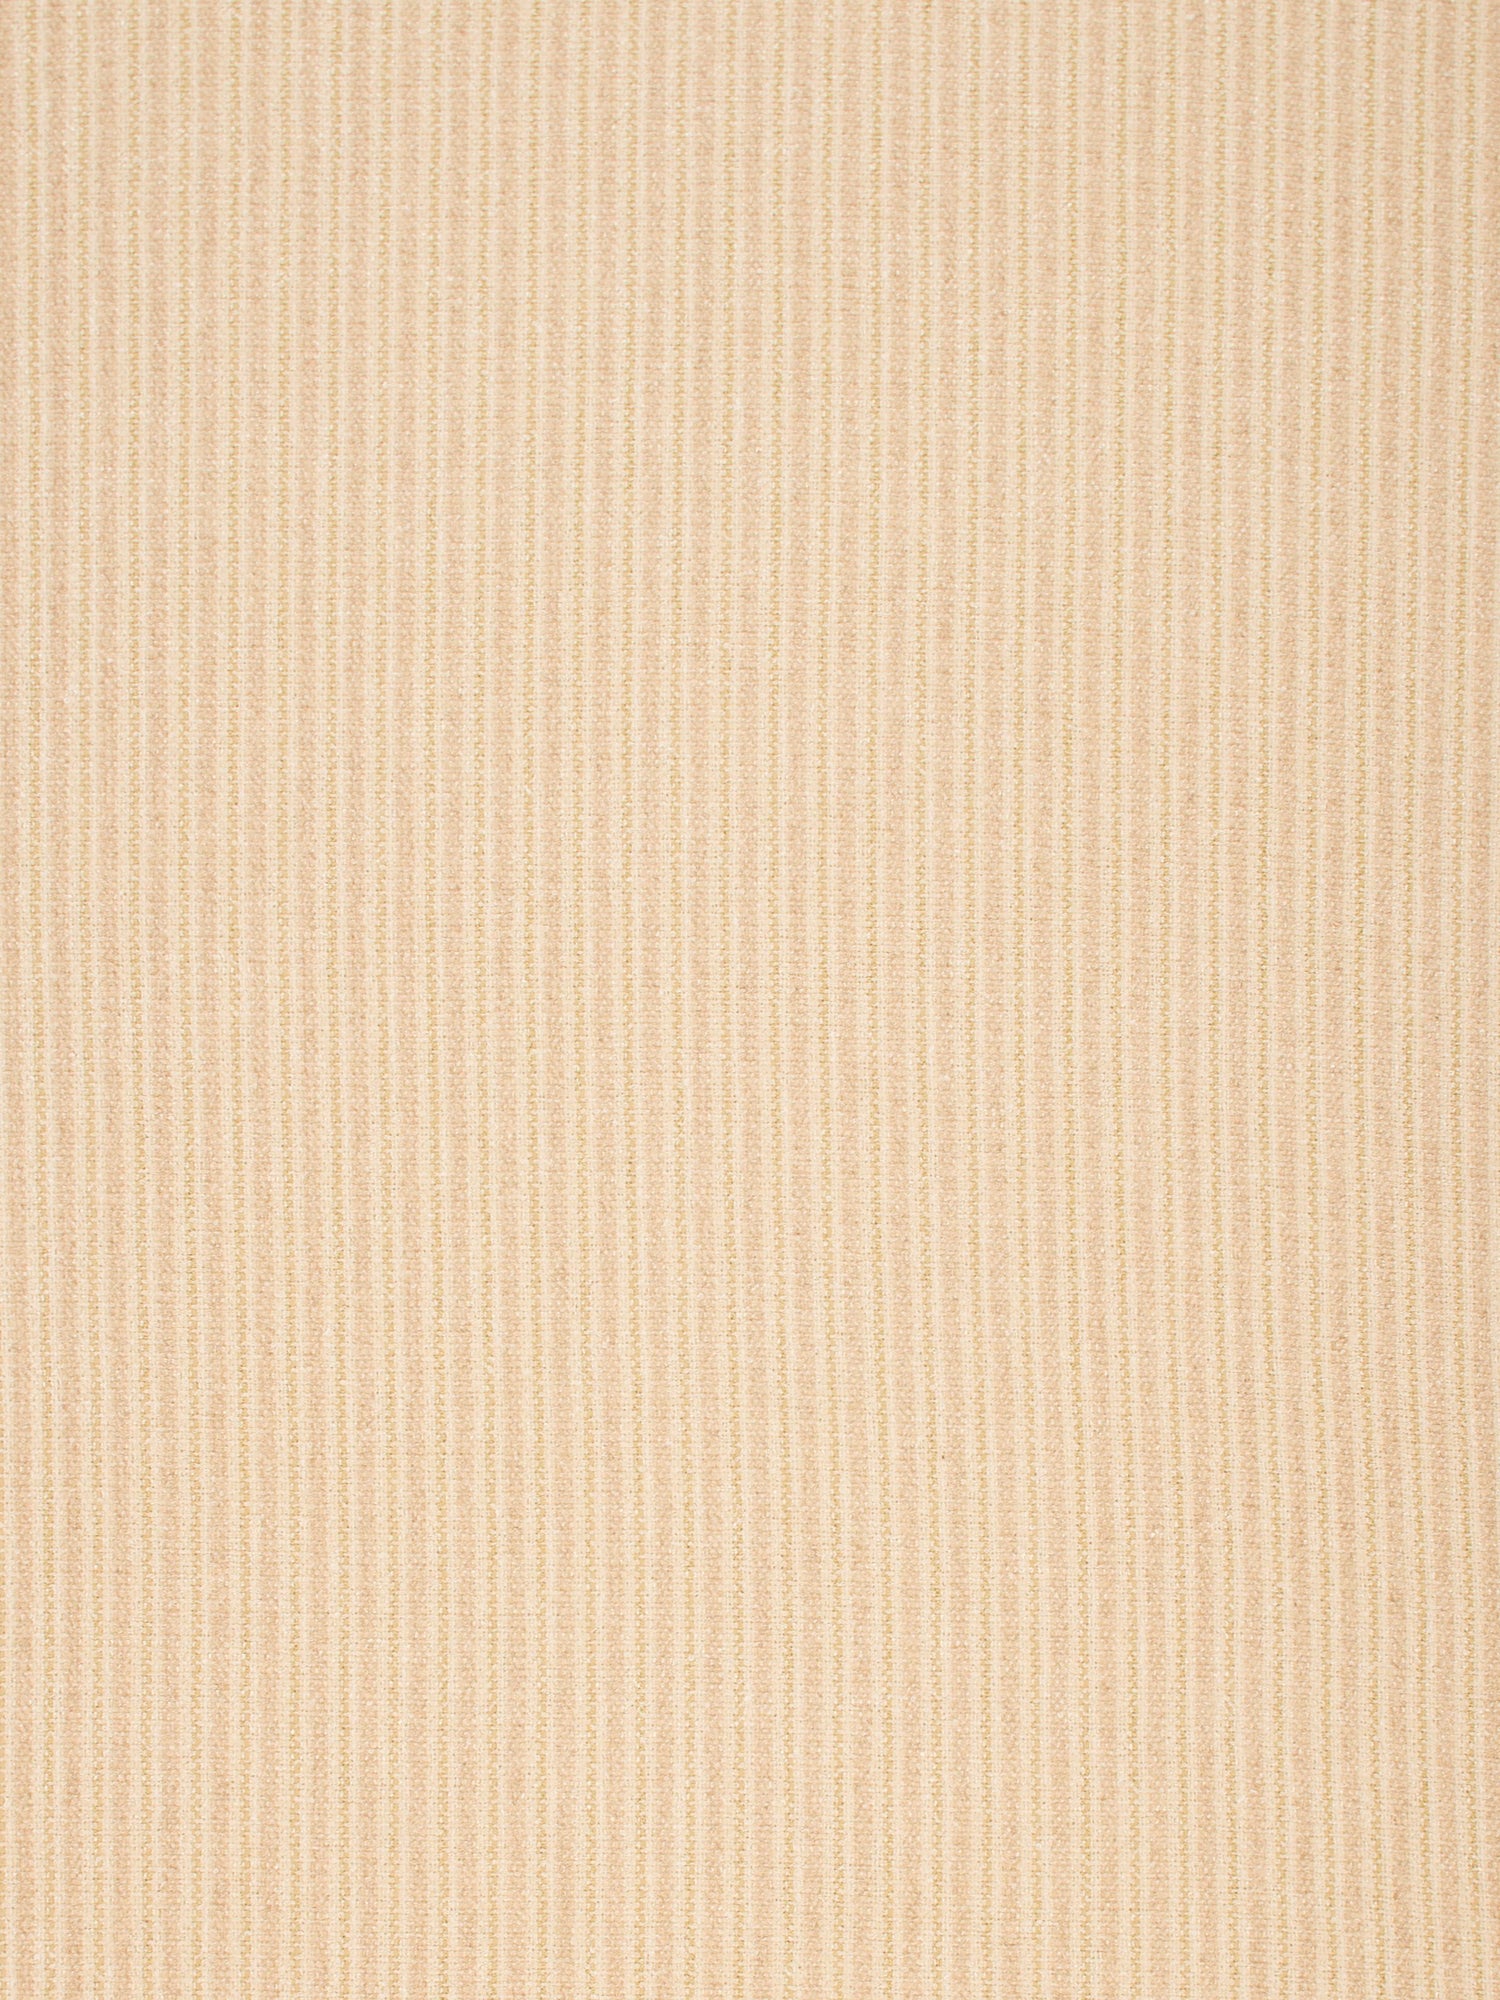 Hollywood Stripes fabric in champagne color - pattern number PW 00011970 - by Scalamandre in the Old World Weavers collection